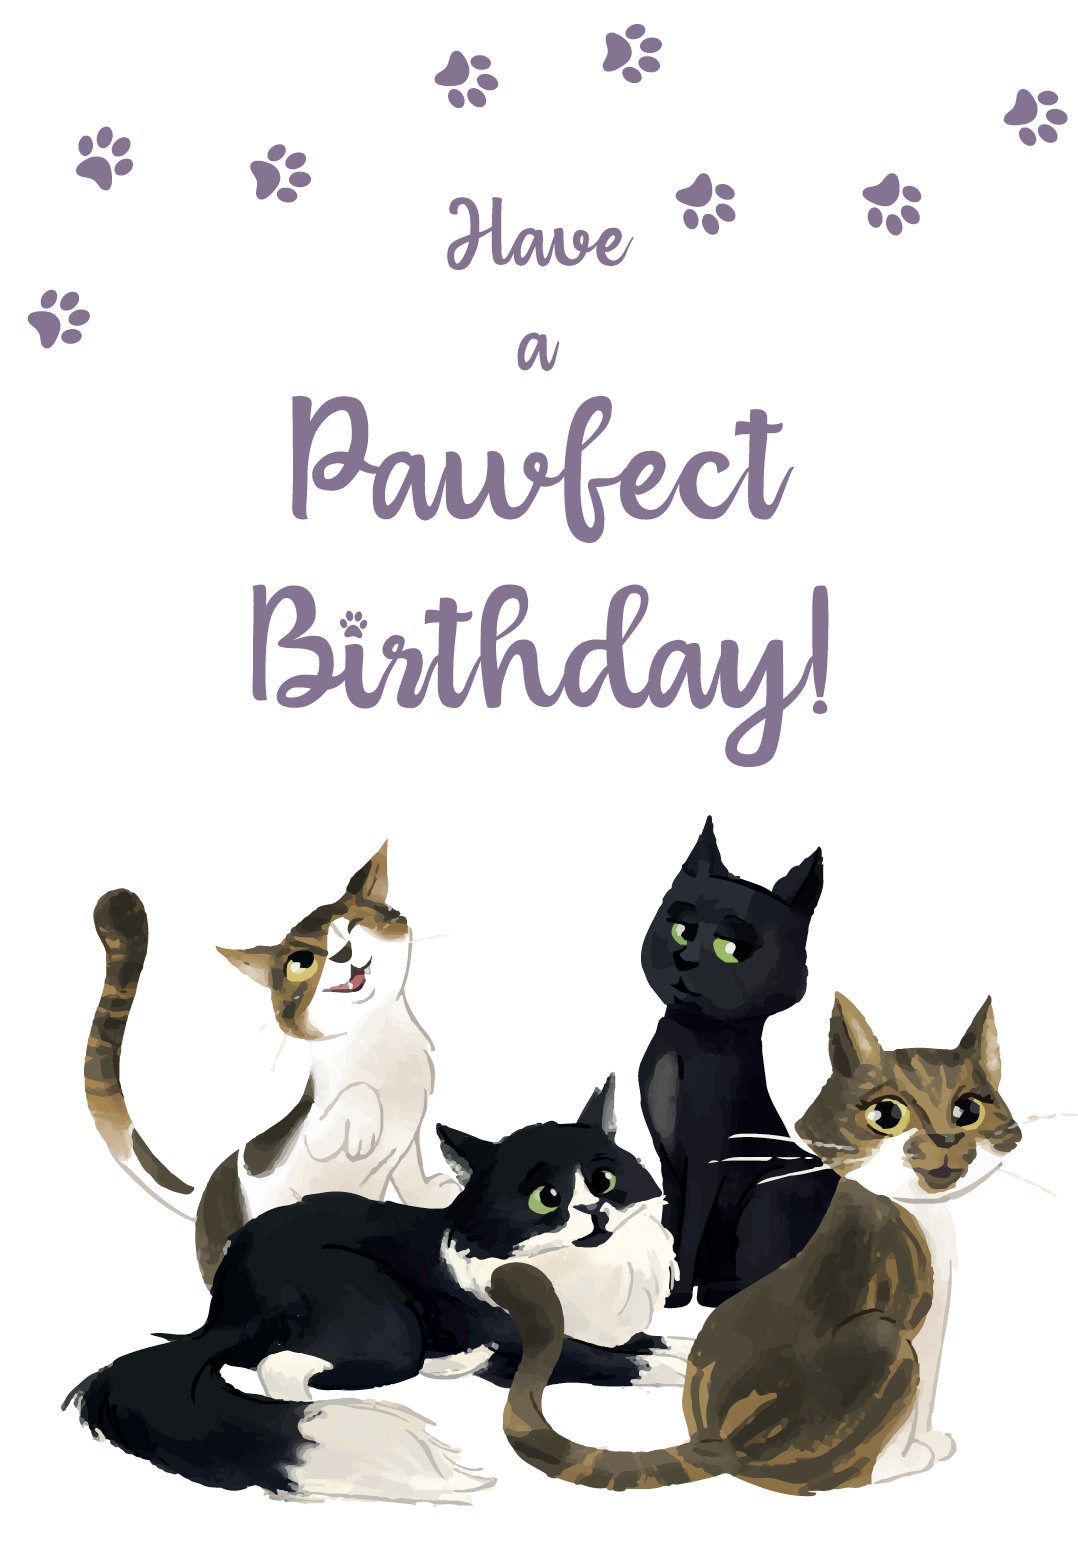 Birthday Card 4 Cats Have a Pawfect Birthday